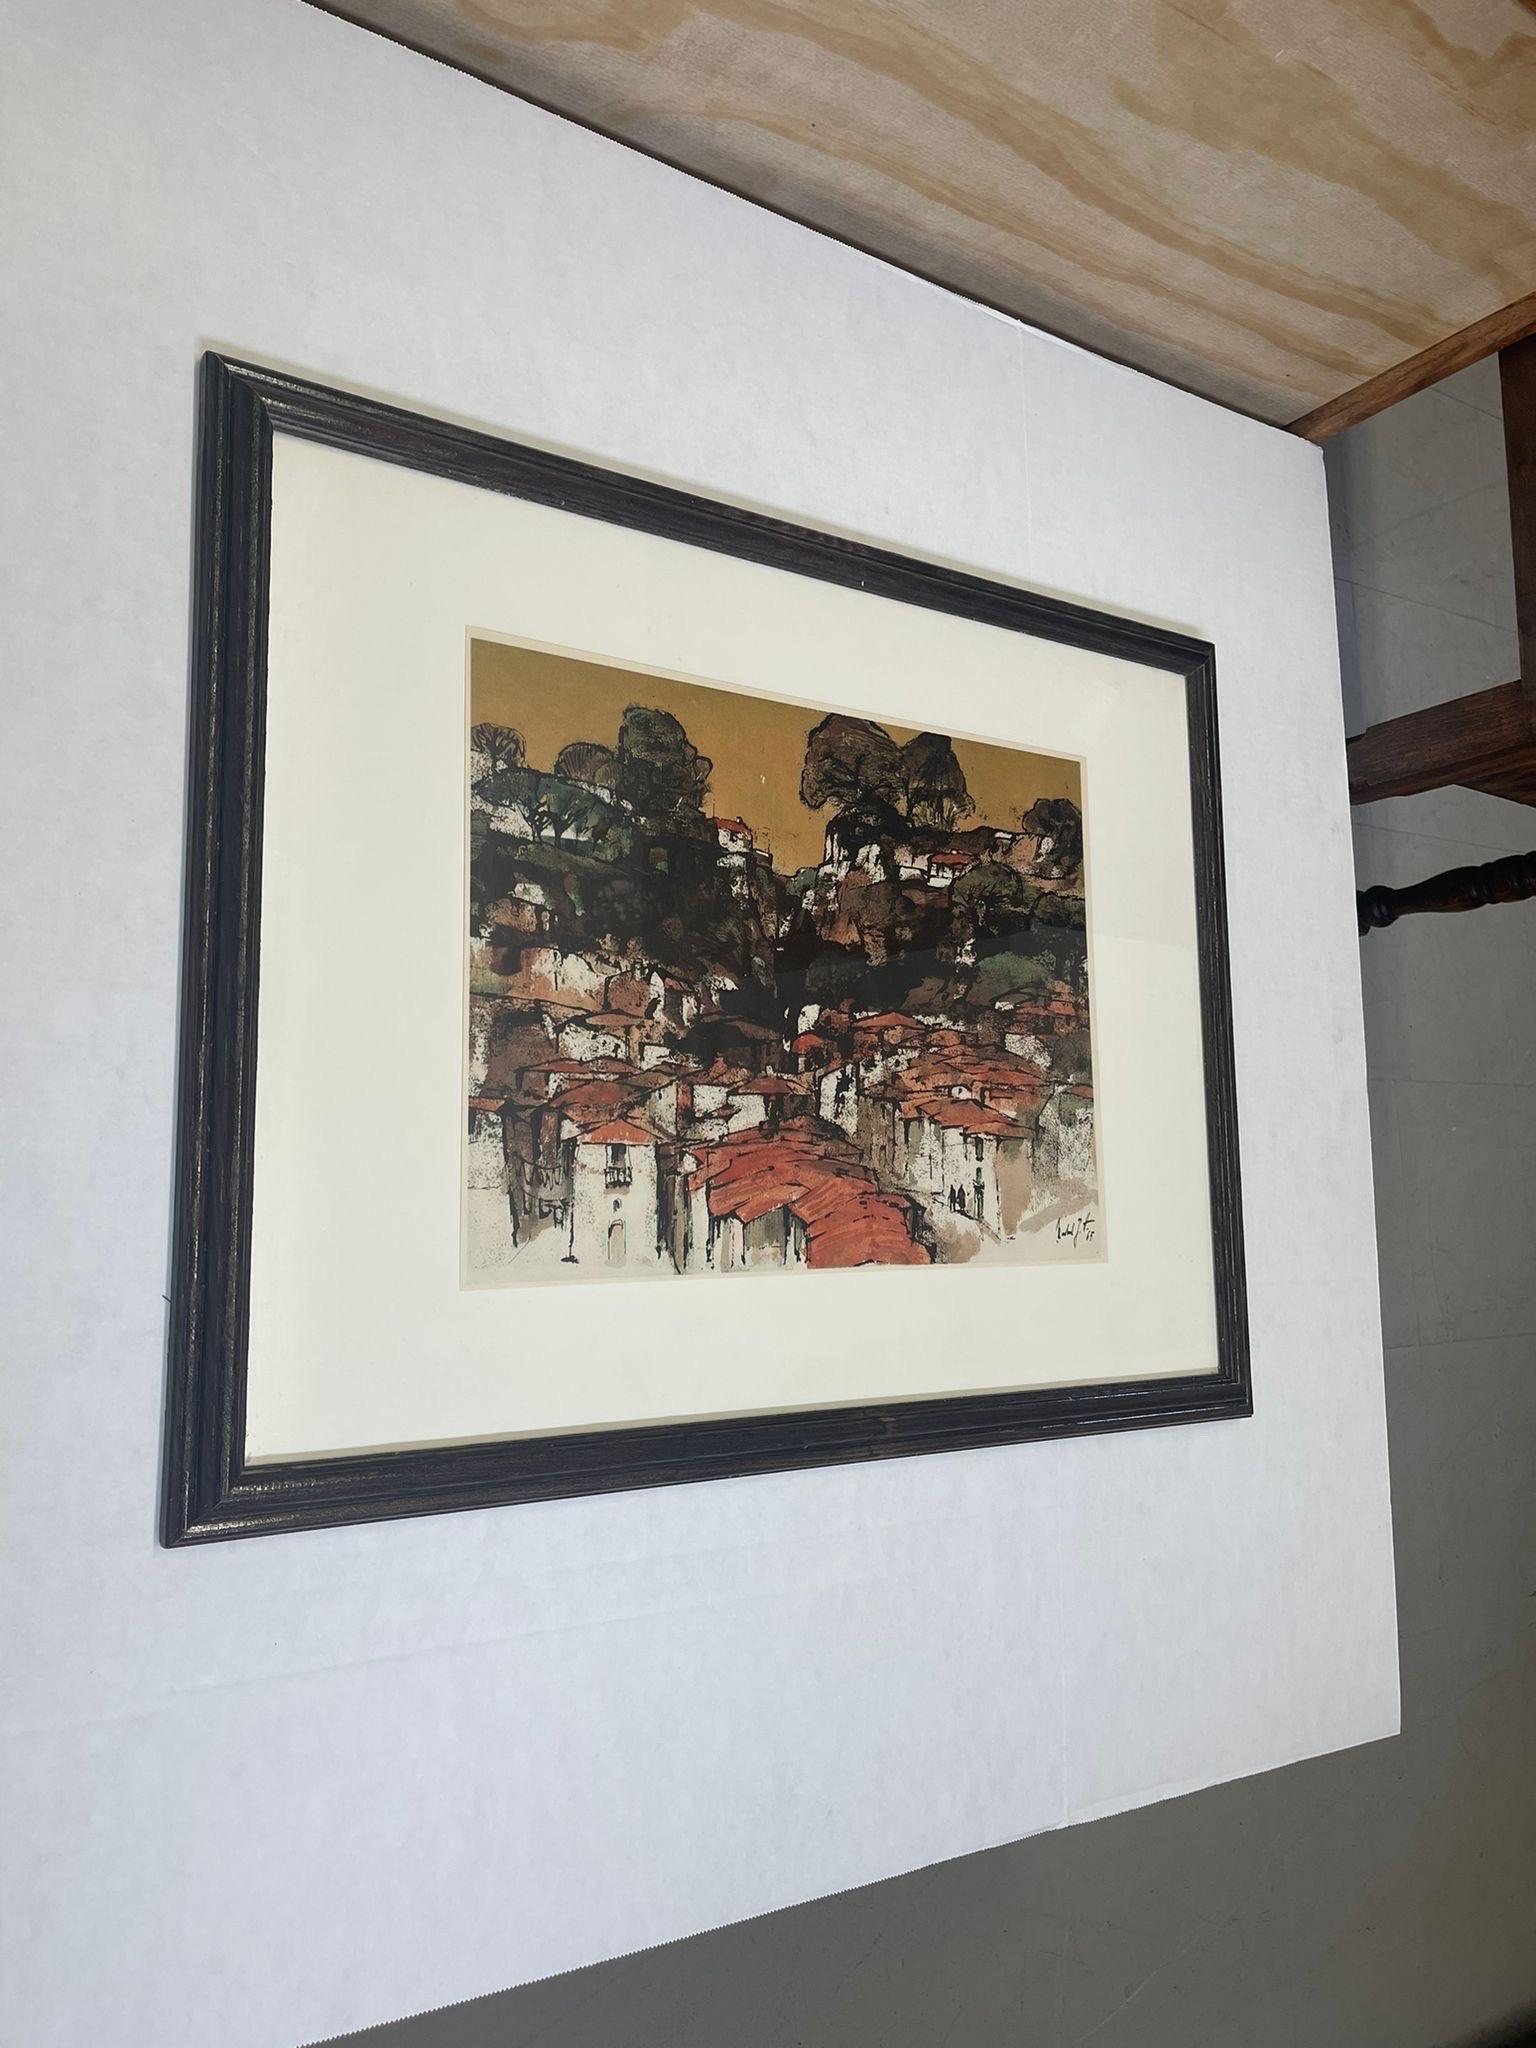 Framed and Matted within wooden frame. Signed in the Lower Corner.Abstract Cityscape print. Vintage Condition Consistent with Age as Pictured.

Dimensions. 27 W ; 1/2 D ; 20